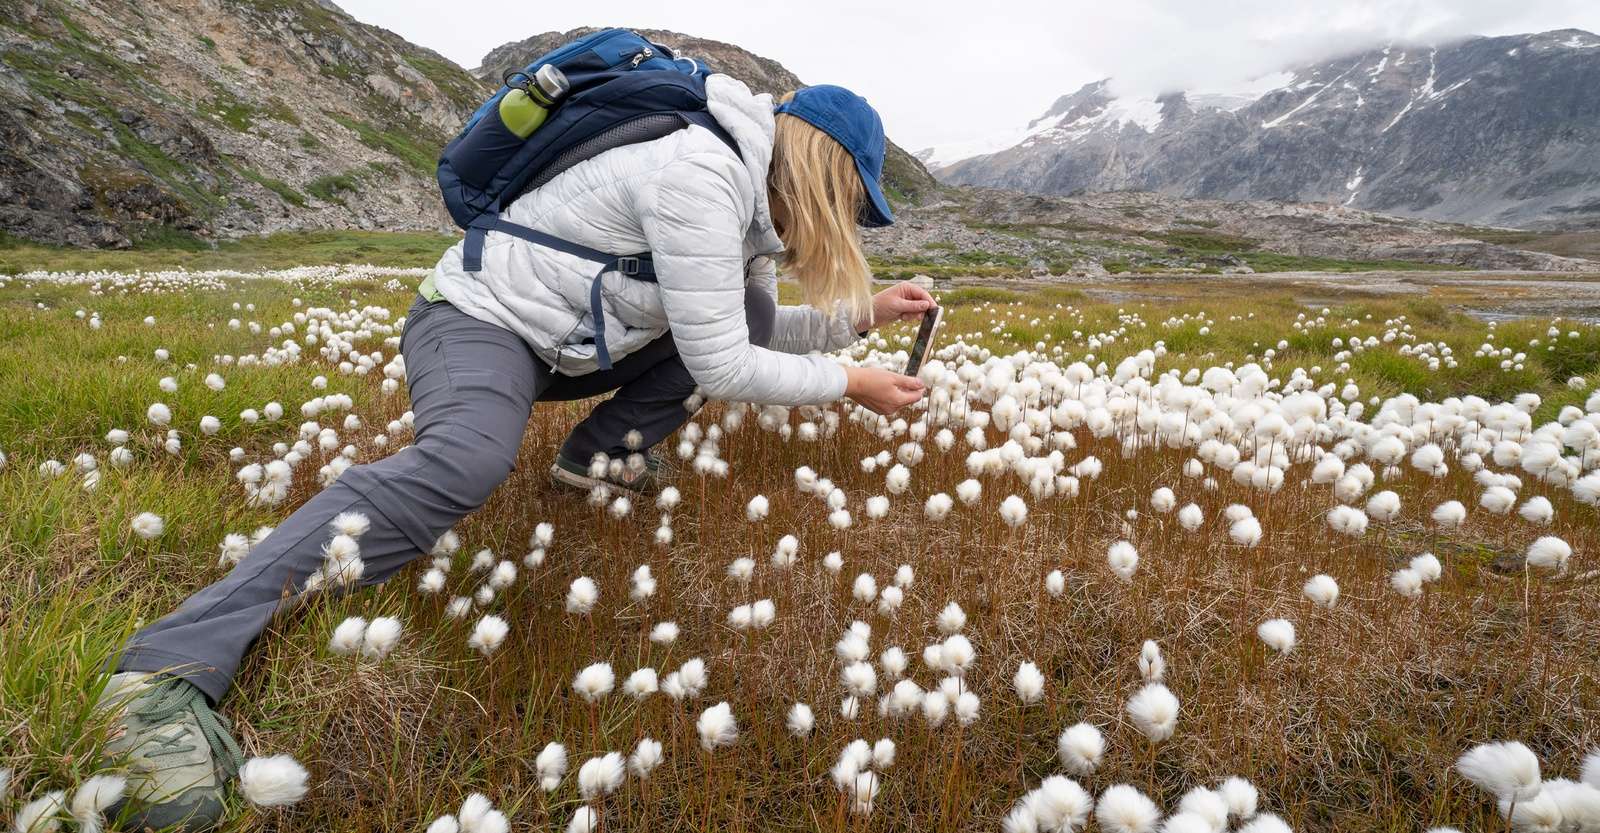 Nat Hab guest photographing arctic cotton, Greenland.